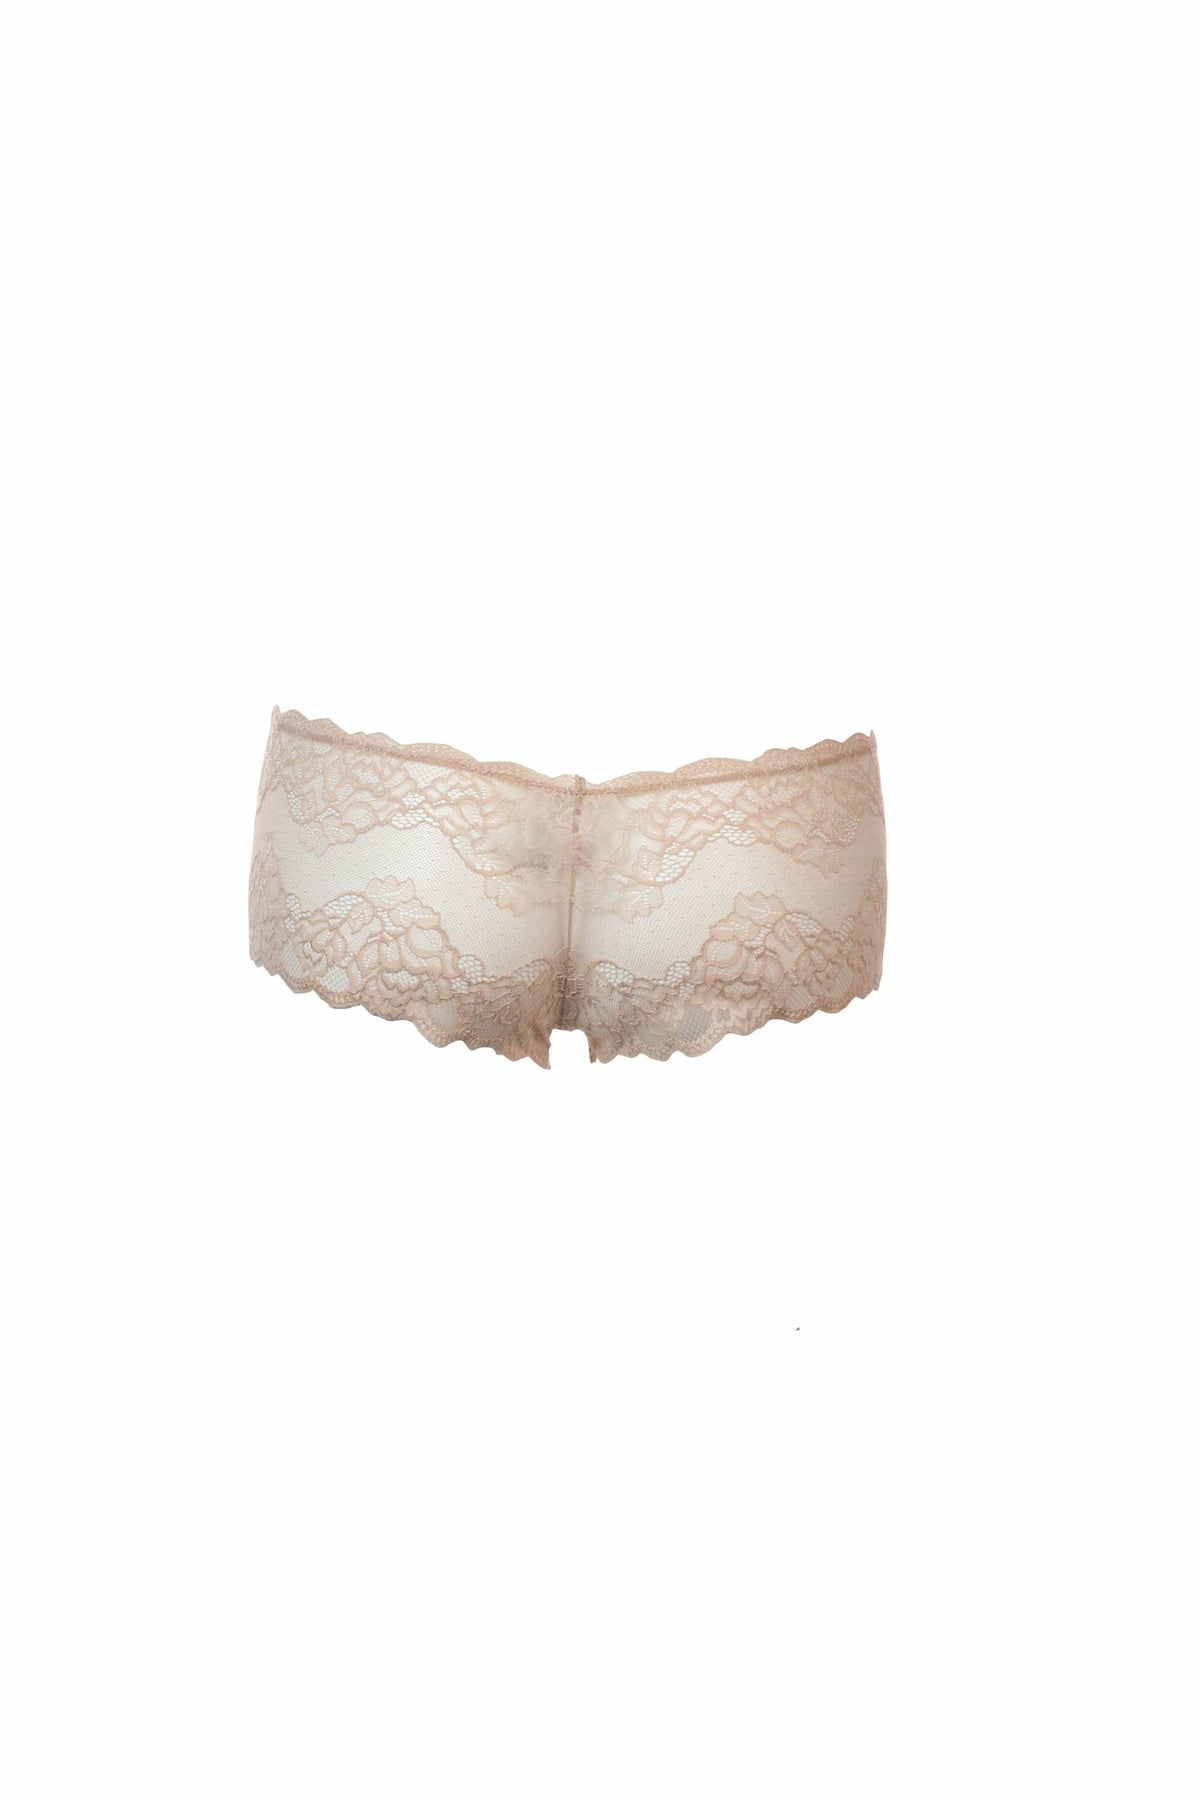 Montelle Lingerie Lace Cheeky Panty- Sand